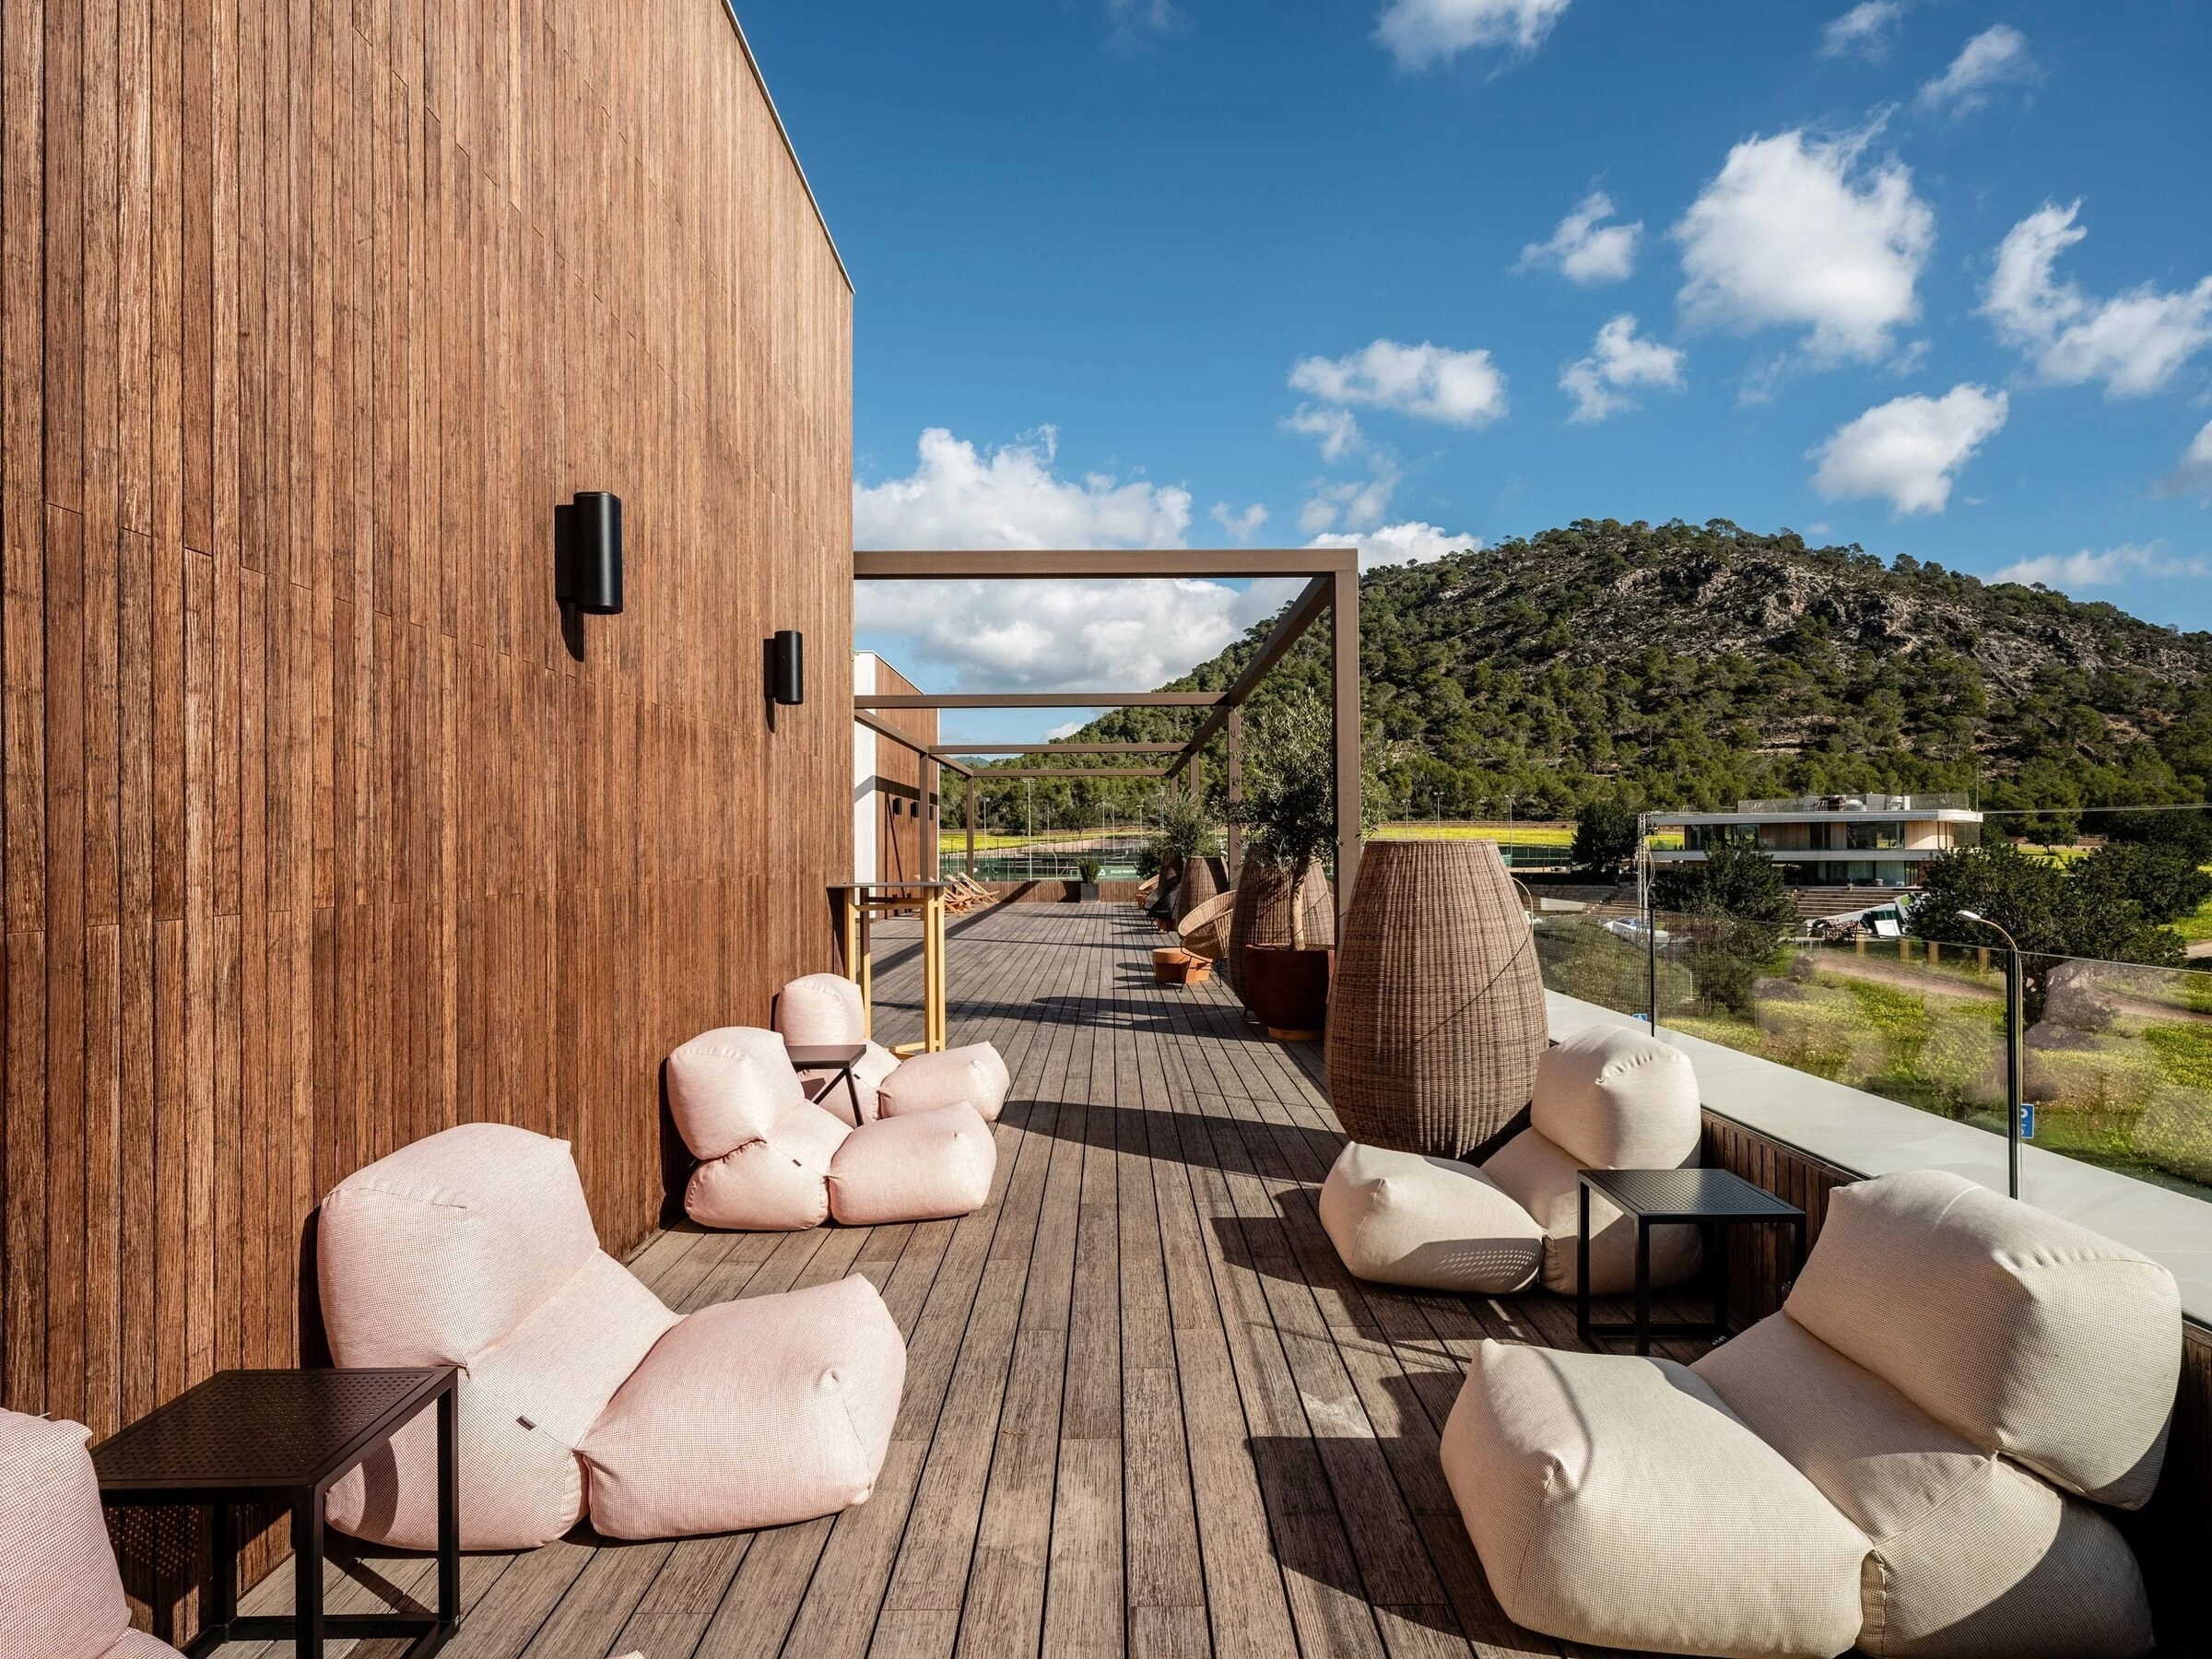 Moso Bamboo Crowned Number One by Archello